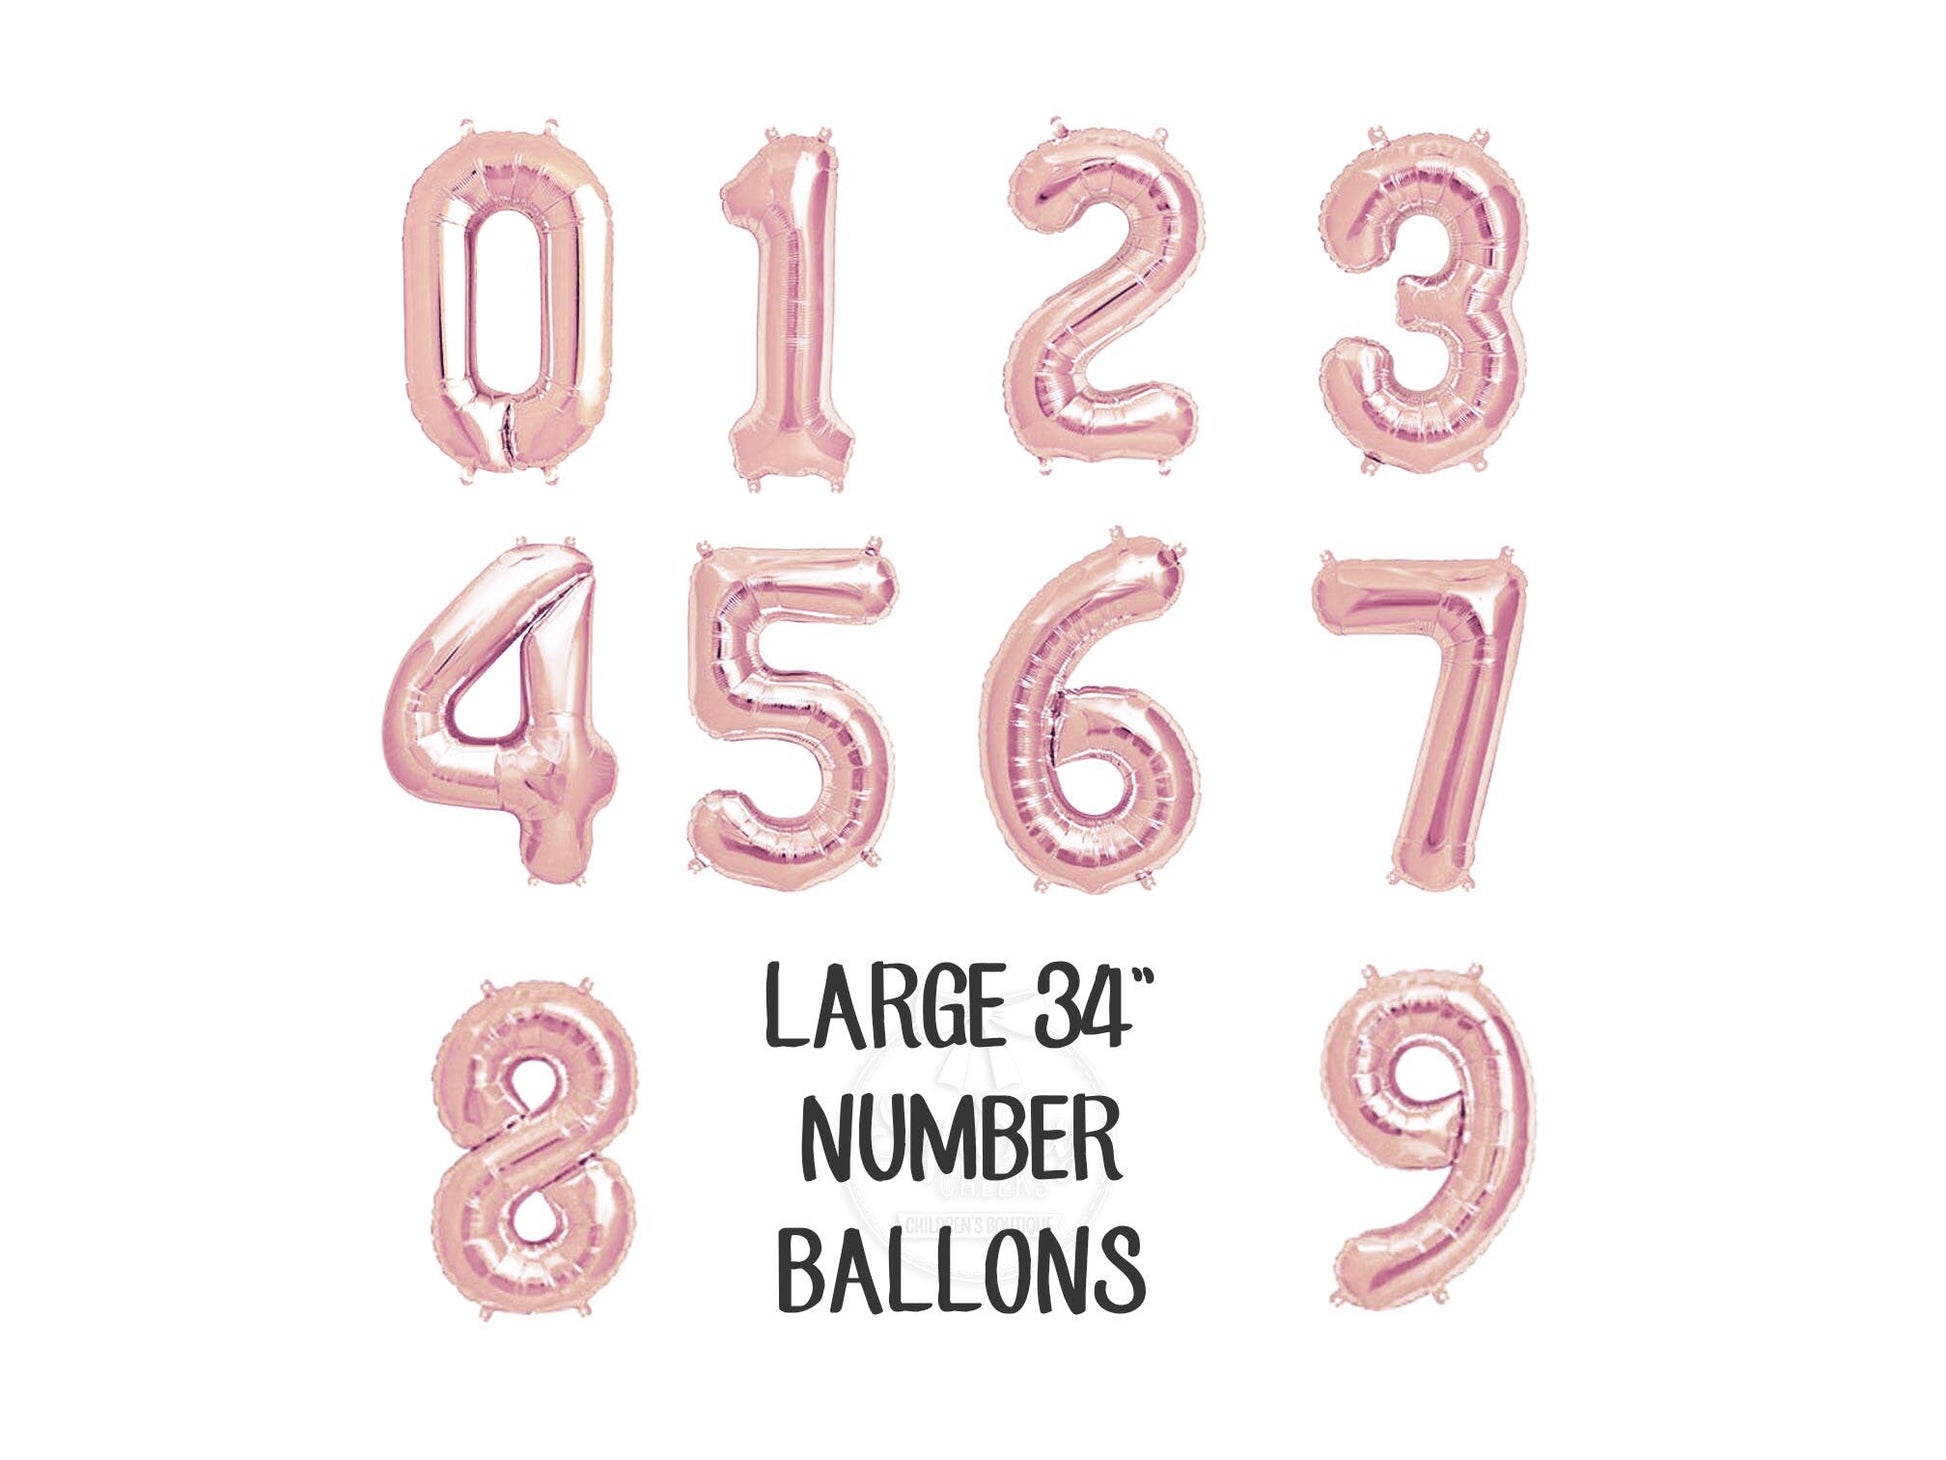 Giant 34" Rose Gold Number Balloon - Squishy Cheeks